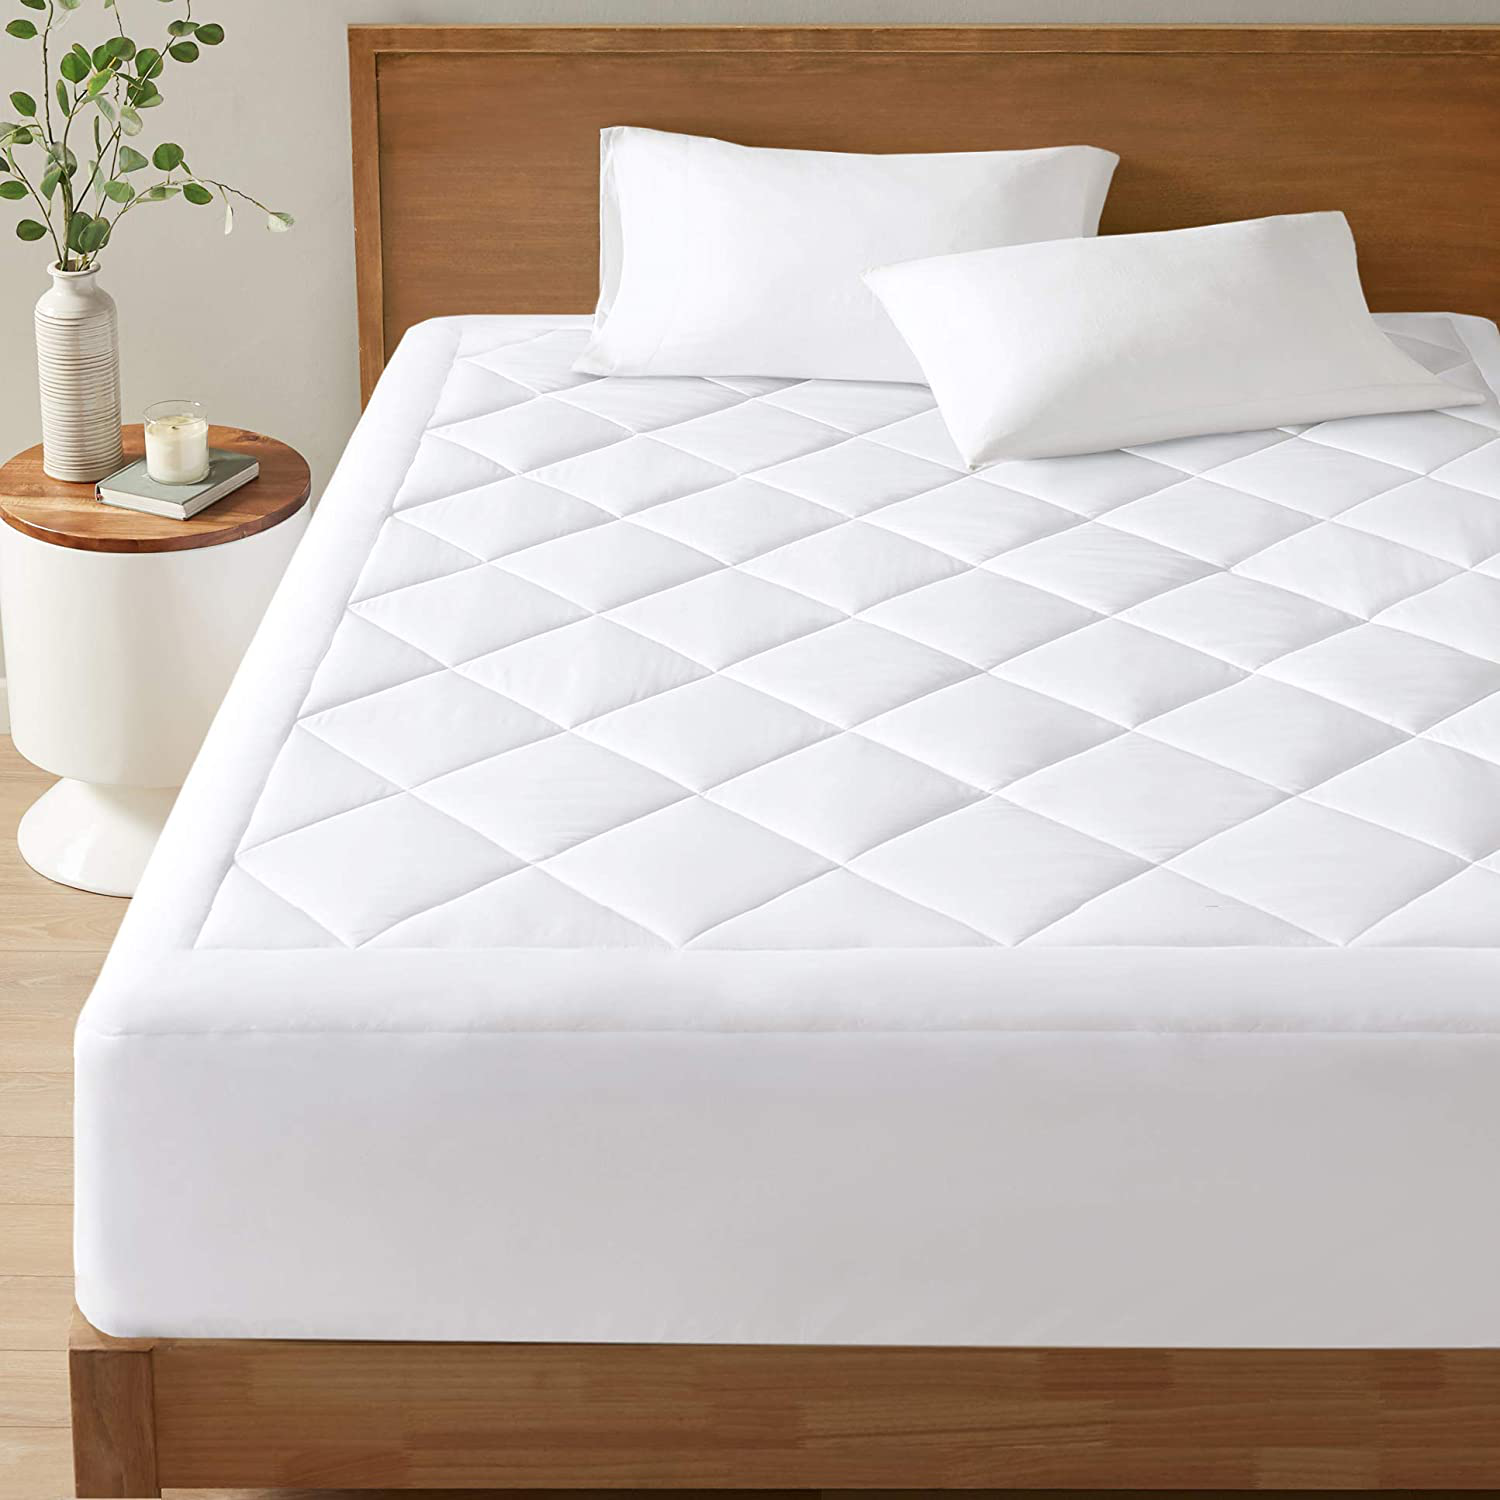 Degrees of Comfort Premium Soft Waterproof Mattress Pad Twin XL Size | Quilted Topper Fitted 13'' Inch Deep Pocket 3M Scotchgard Stain Resistant Protector Cover | Cooling, Washable, Breathable